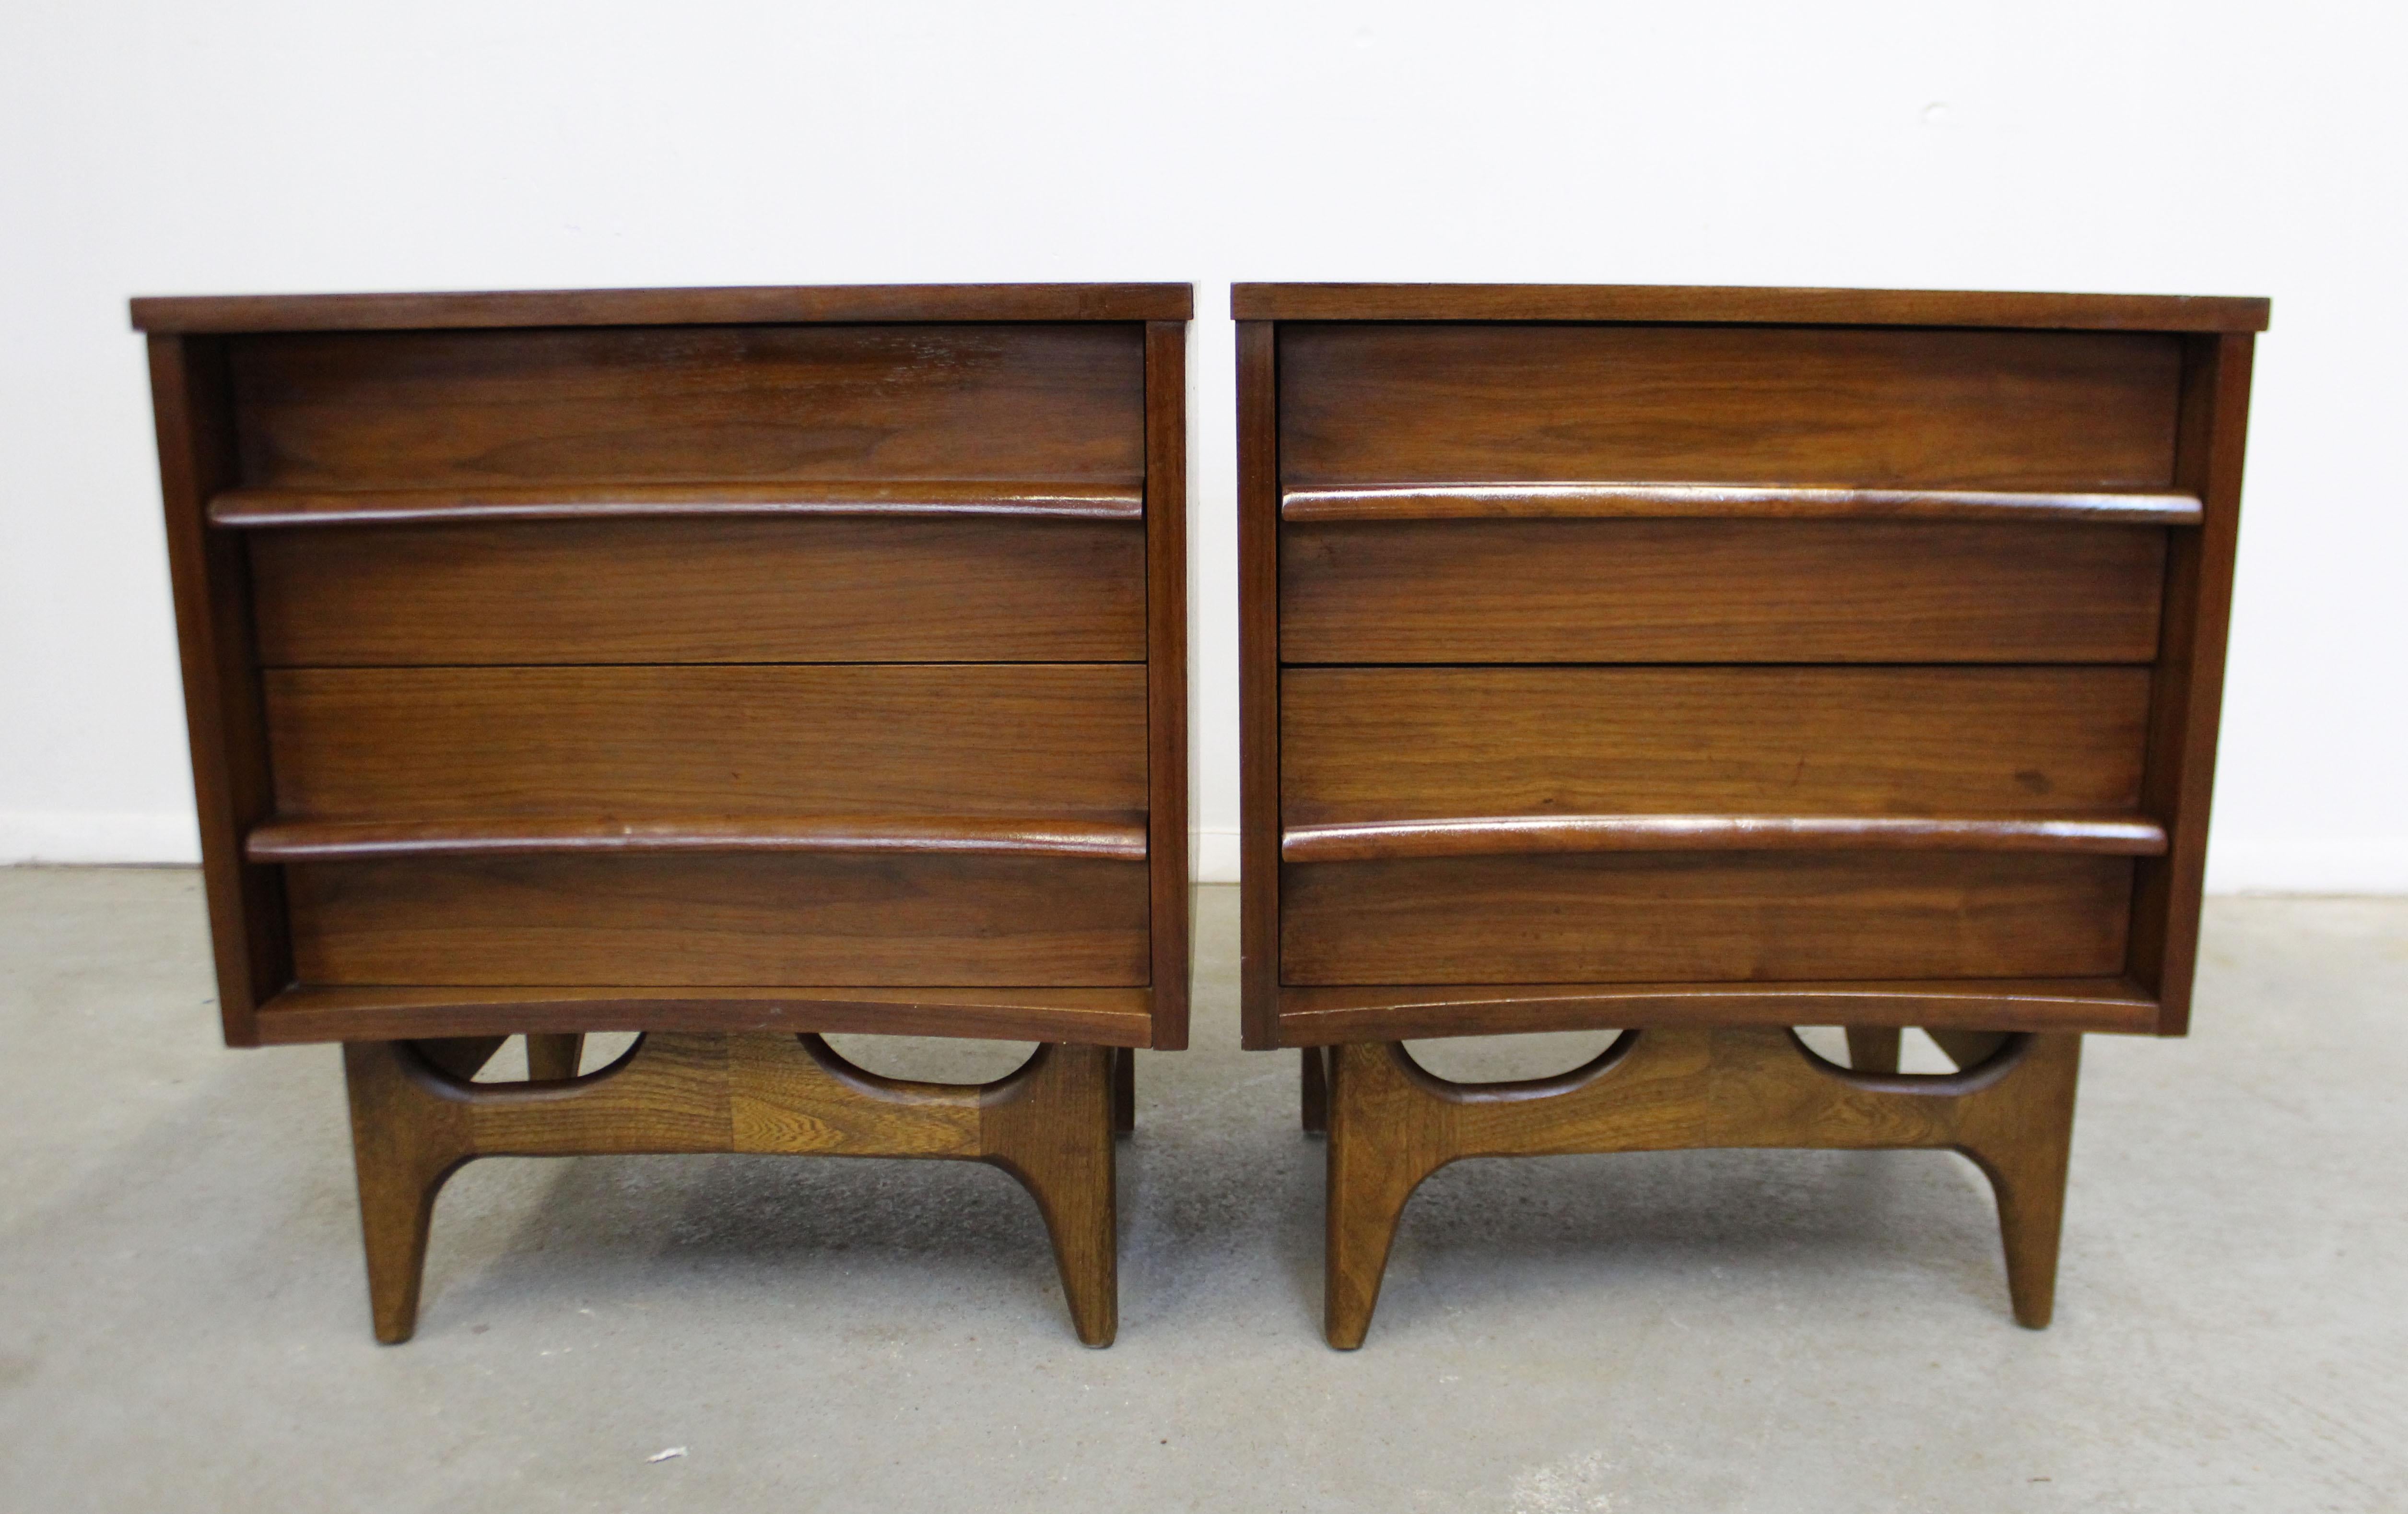 Offered is a beautiful pair of walnut nightstands with concave fronts and sculpted pulls. Includes two dovetailed drawers on each Stand. They are in very good vintage condition with slight surface scratches, small chips, and age wear. They are